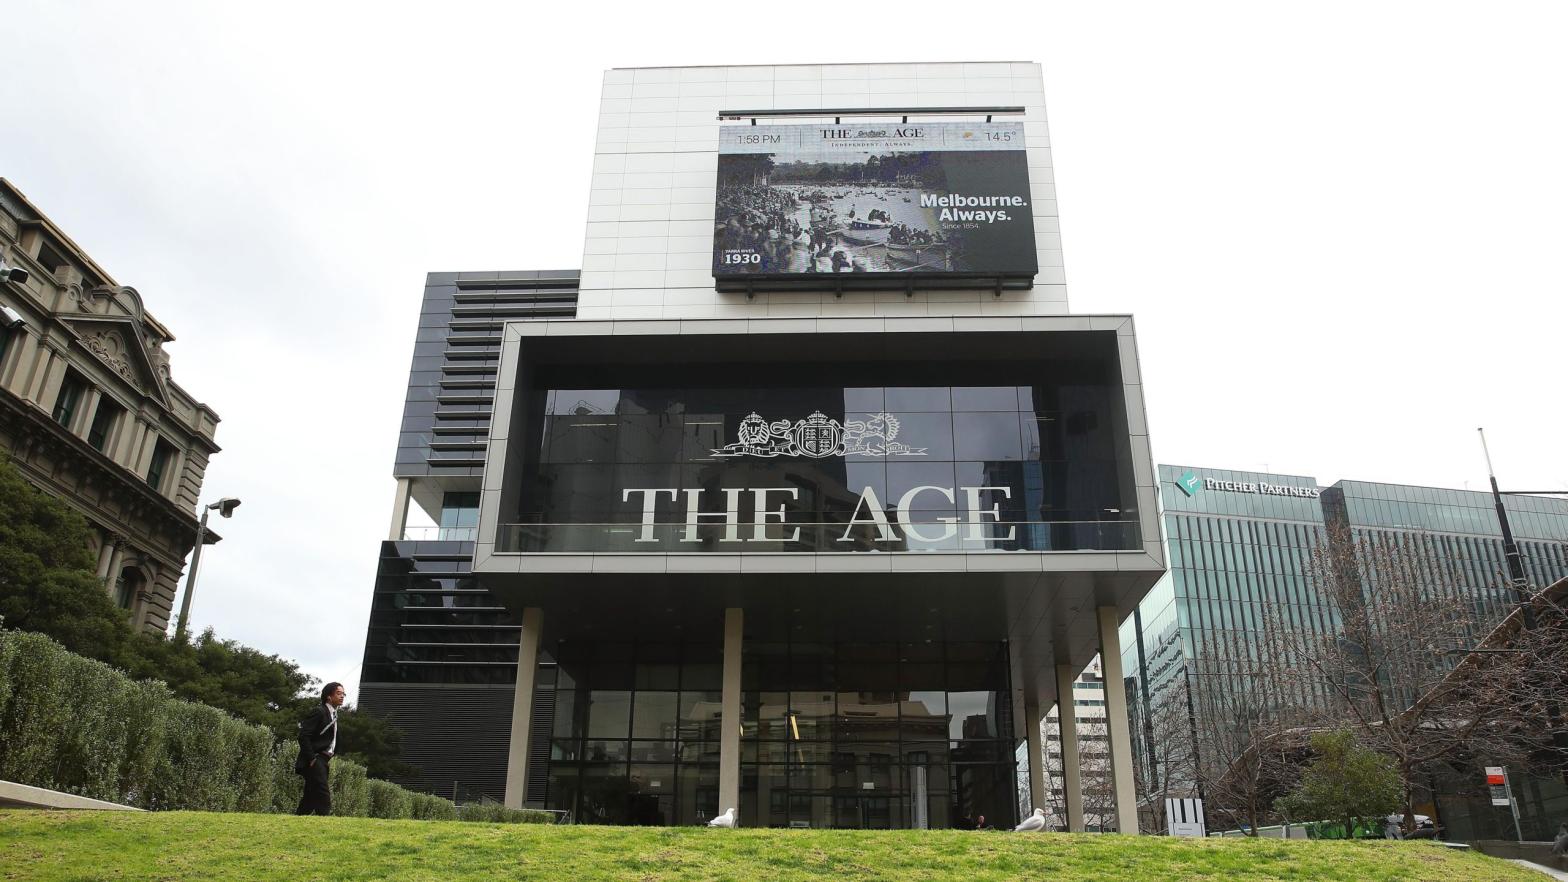 A general view of the Fairfax Media offices, one of the companies being sued, in Melbourne, Australia. (Photo: Scott Barbour, Getty Images)